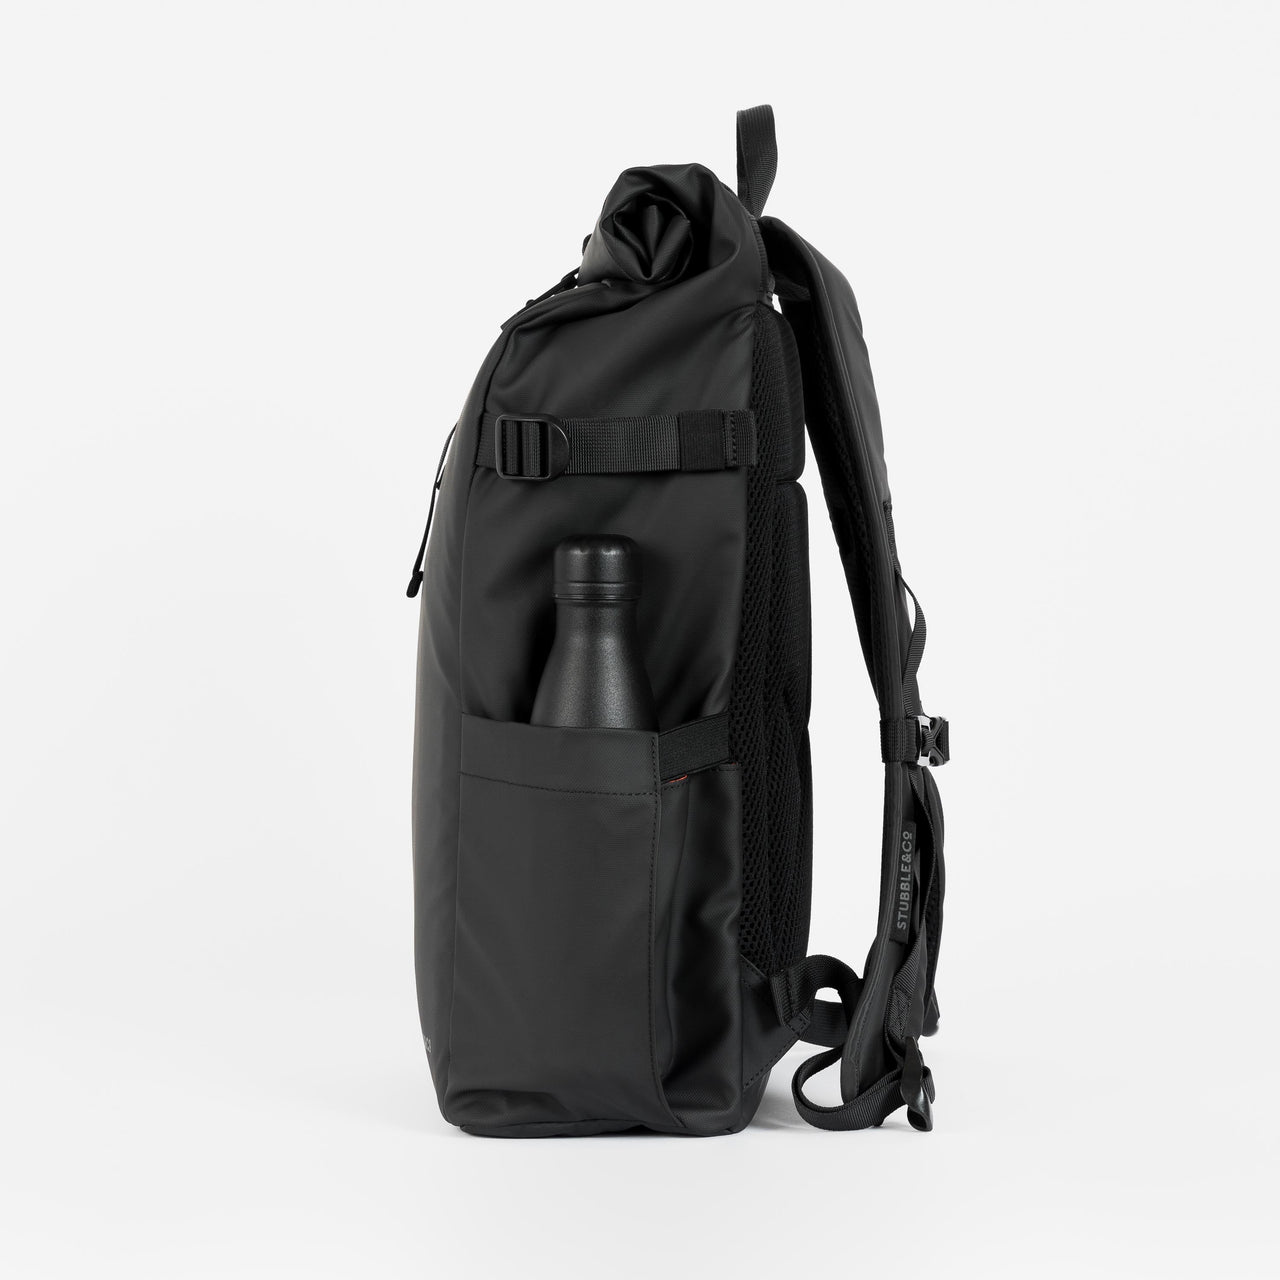 Roll Top backpack in All Black